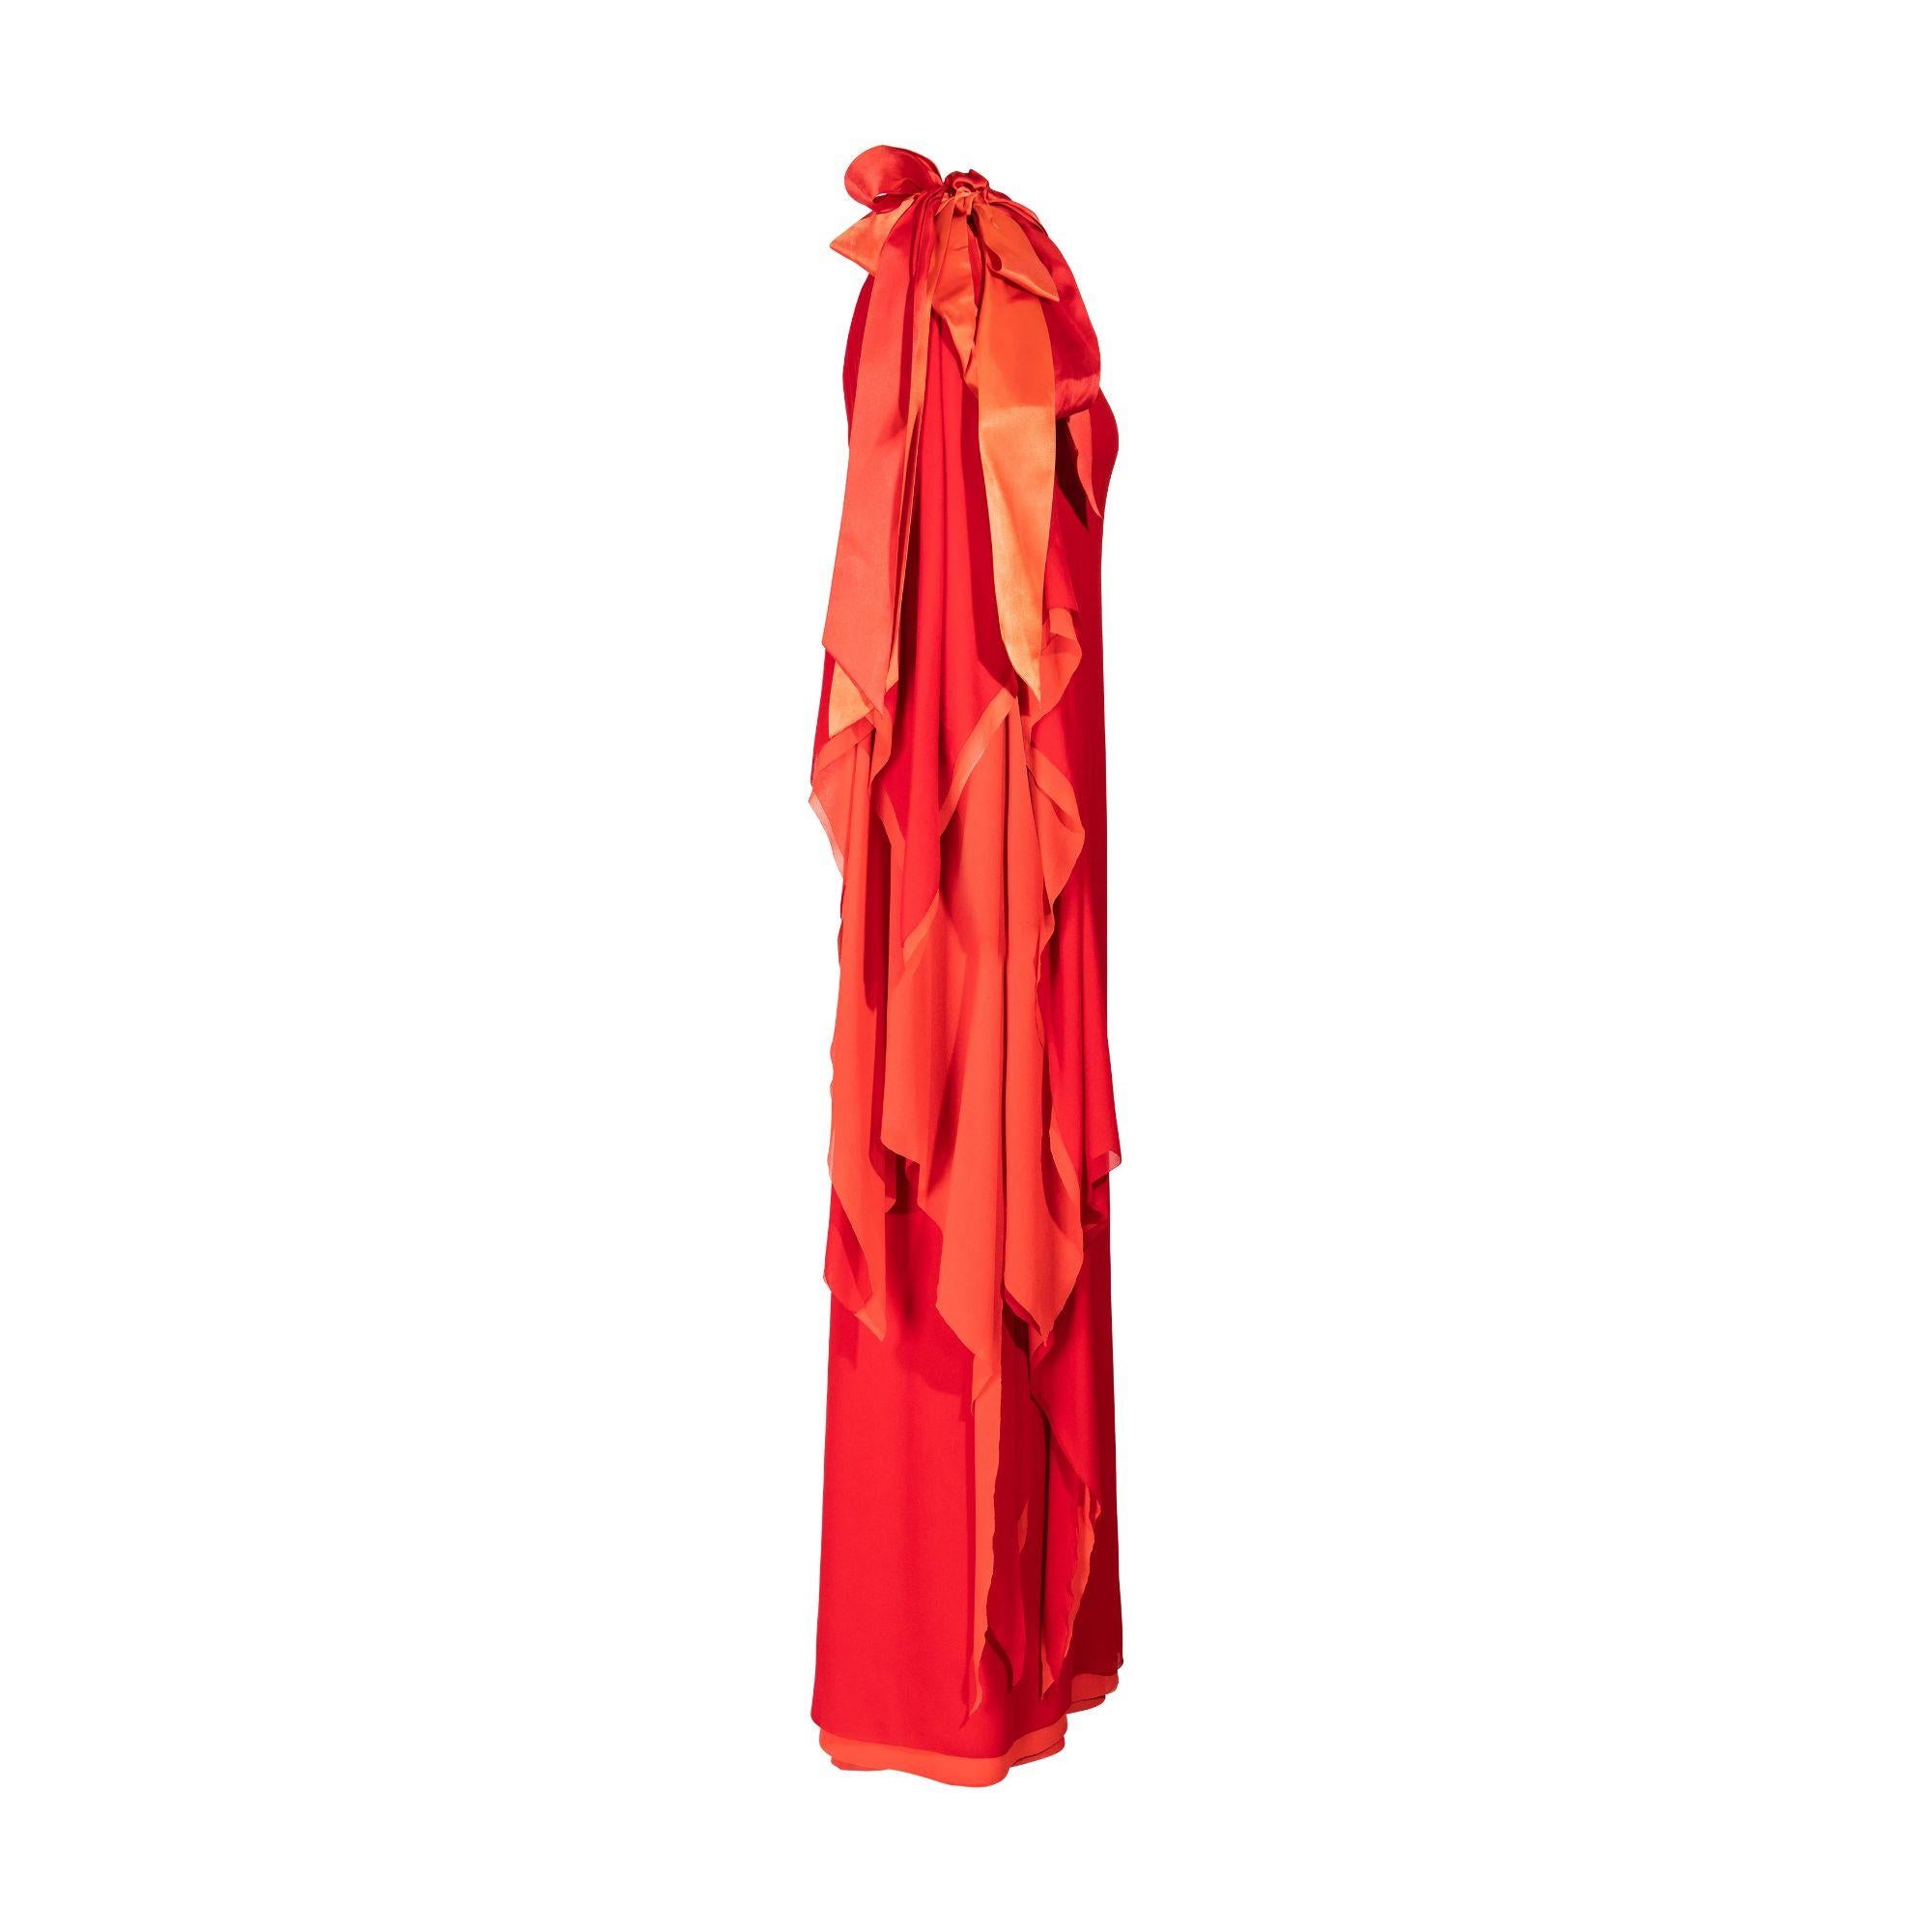 1979 Pierre Cardin Haute Couture red and orange asymmetrical silk chiffon evening gown. One-shoulder gown with long handkerchief hem sleeve on right side and oversized, layered silk bow accent at shoulder. Red-orange exterior silk chiffon with